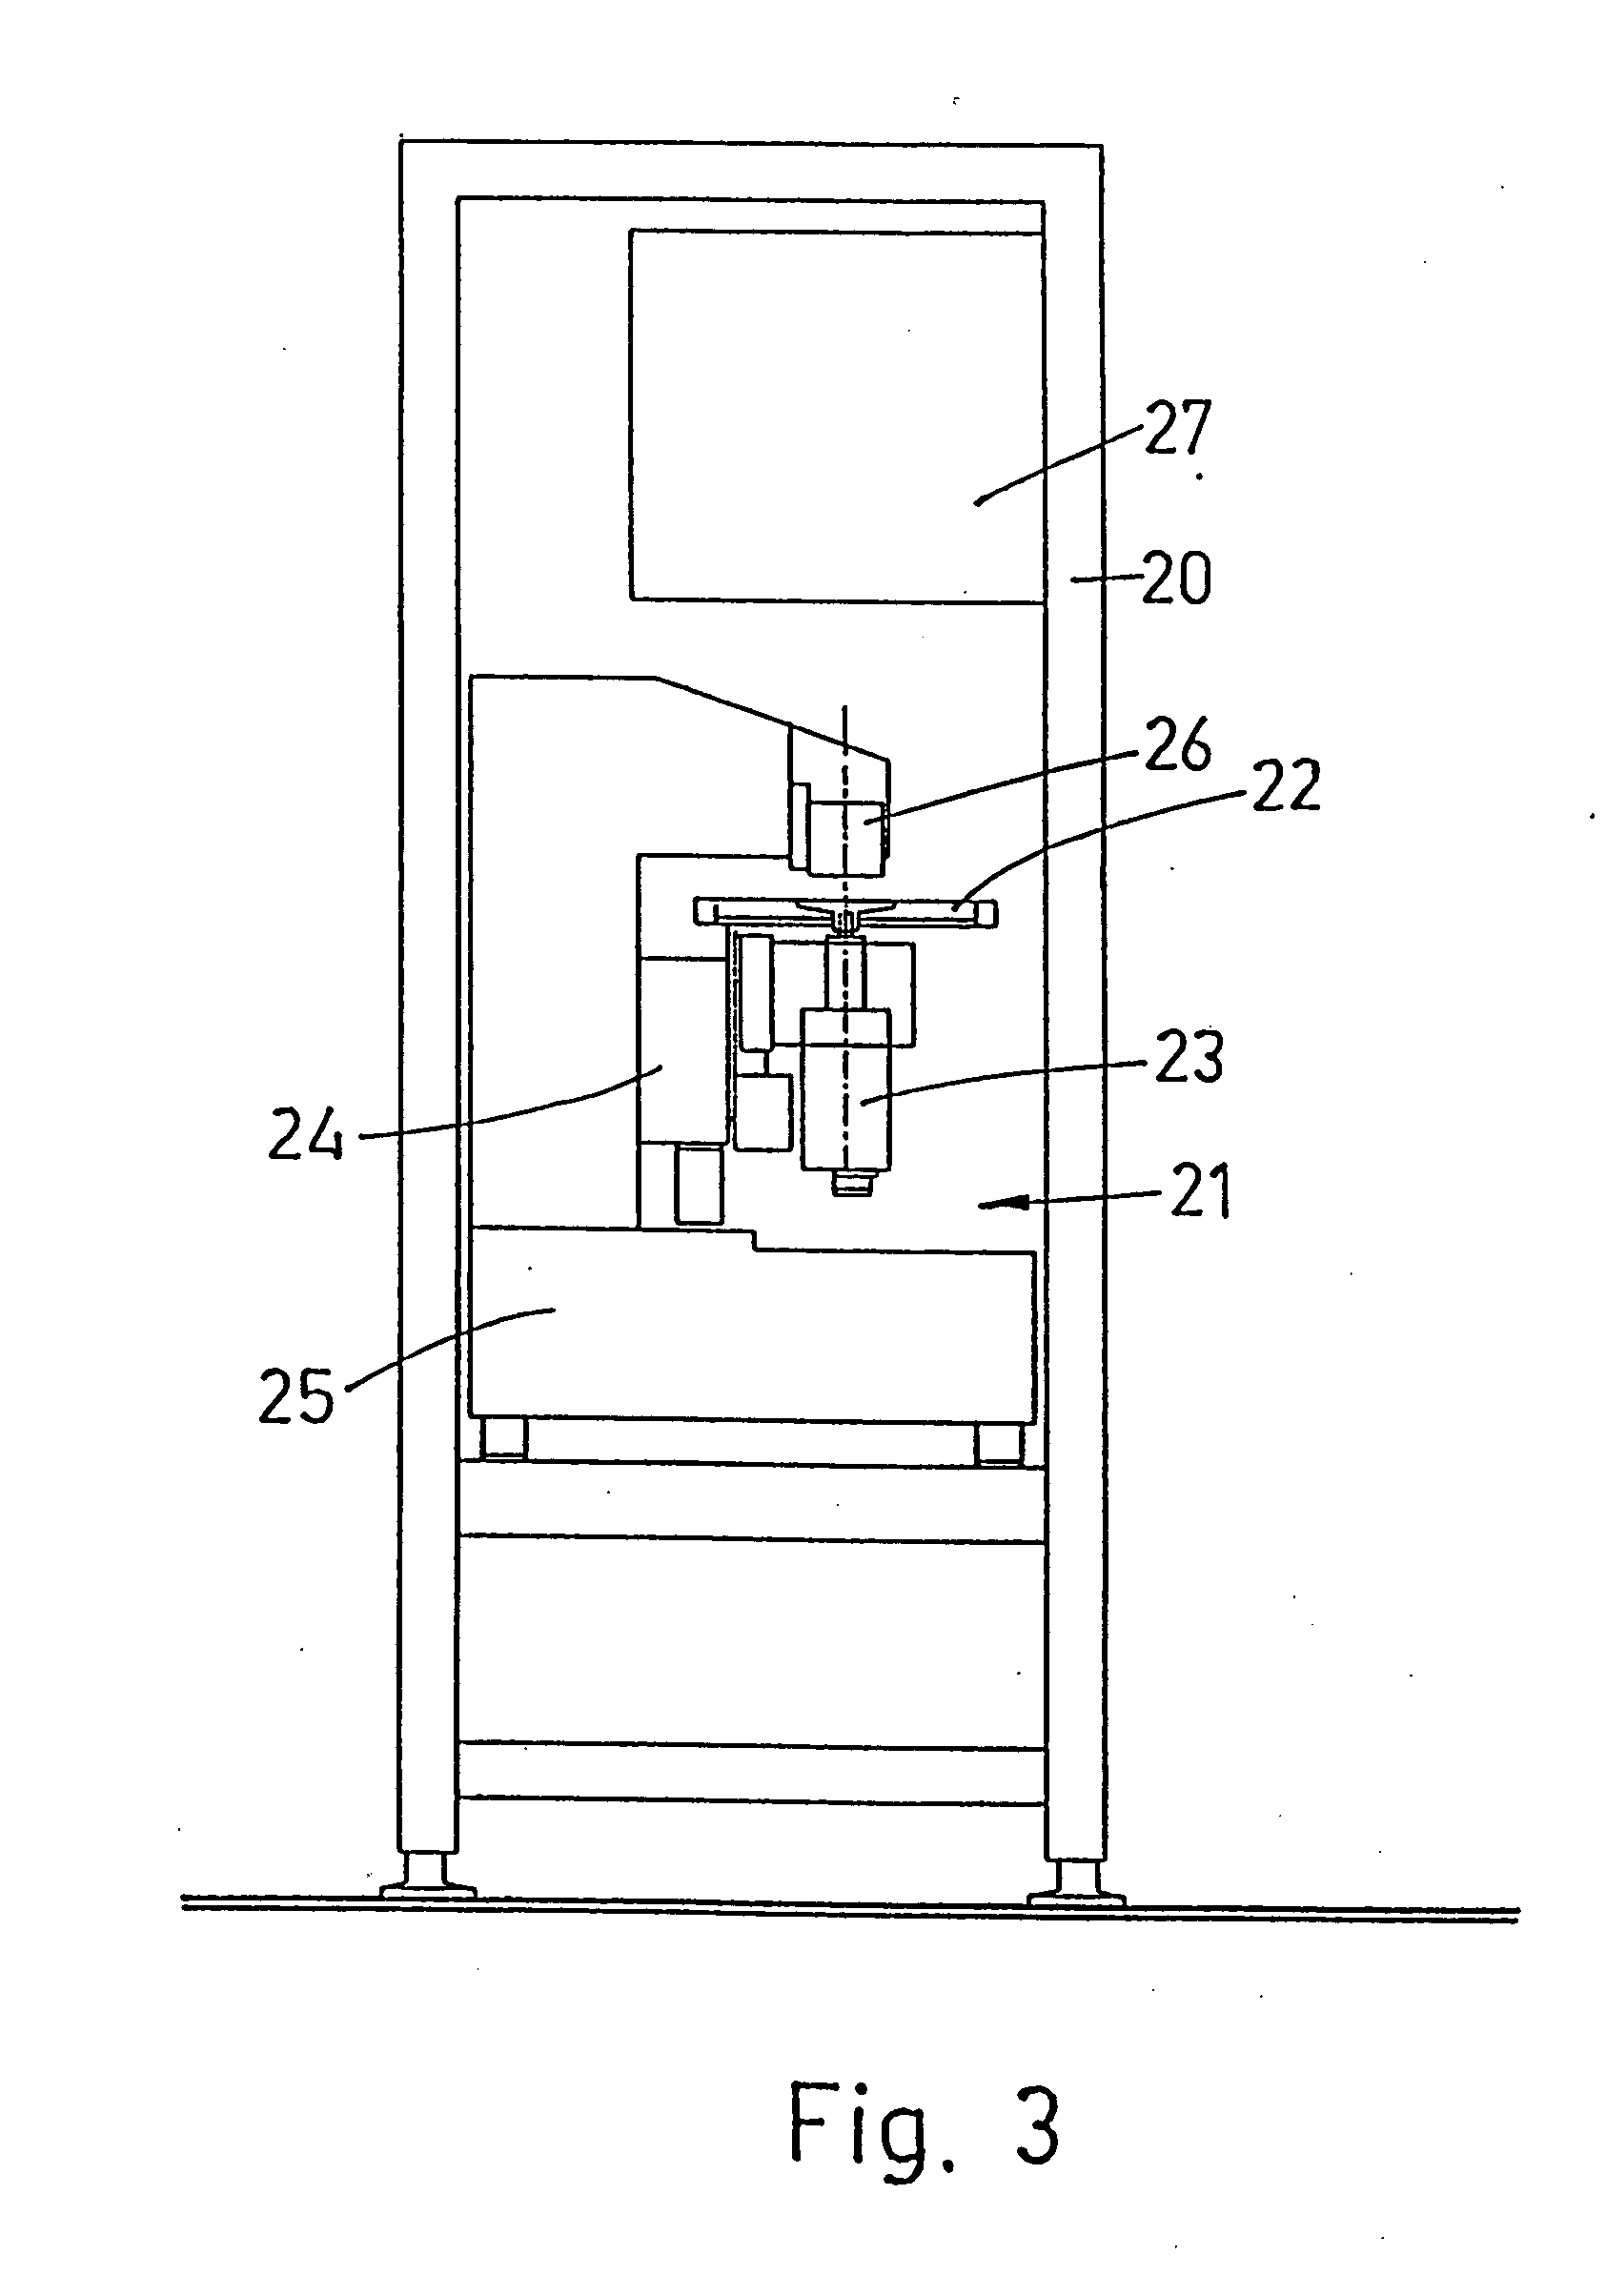 Pixel based machine for patterned wafers